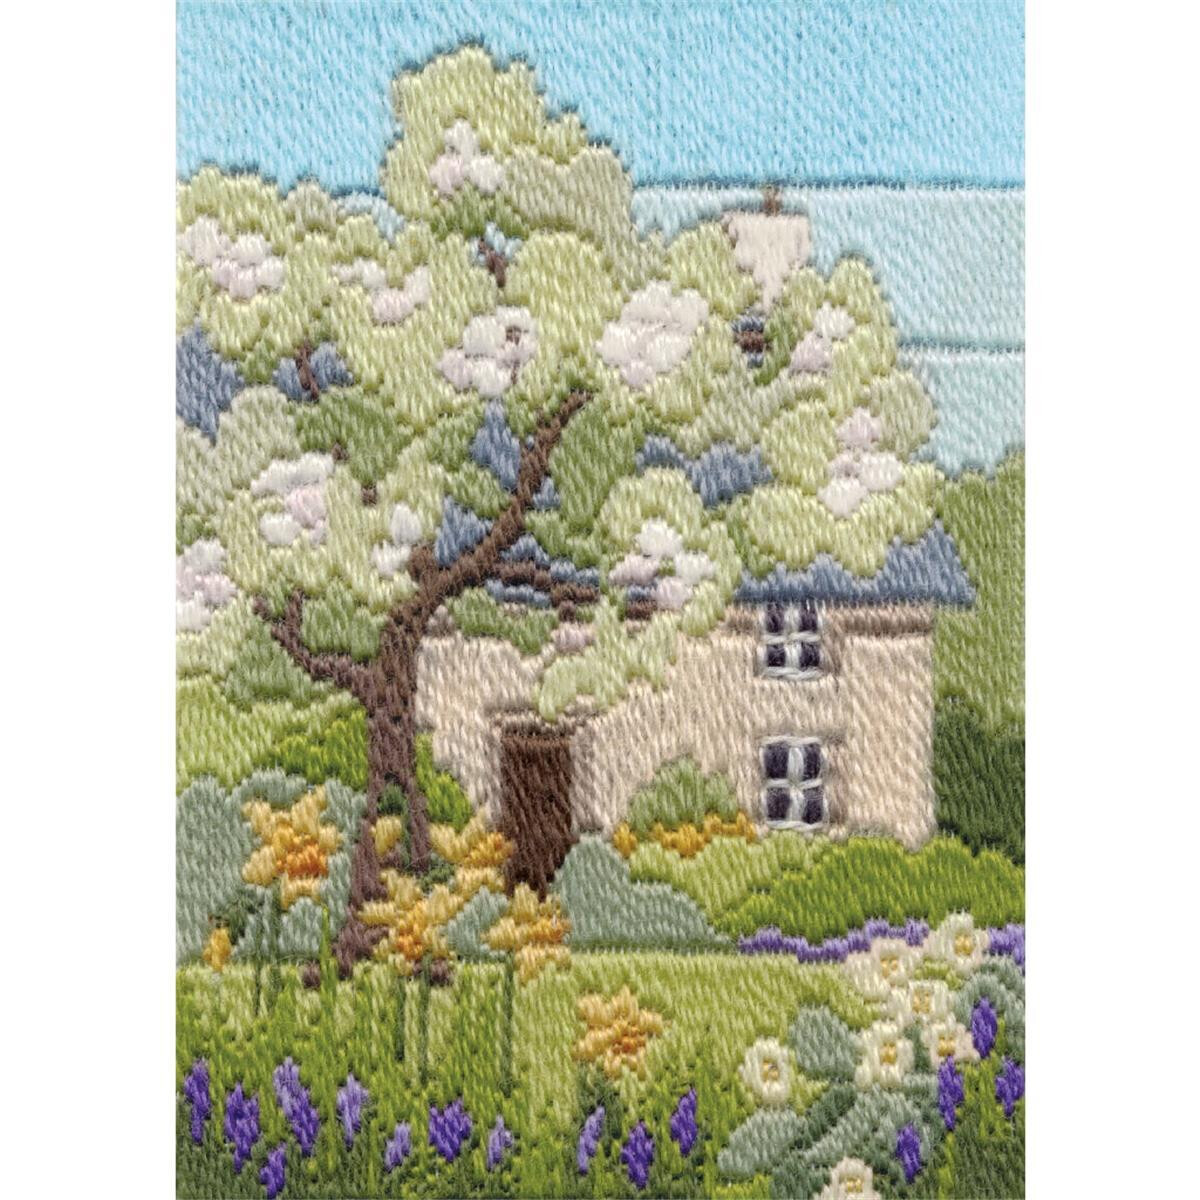 An embroidered scene in the Bothy Threads embroidery pack...